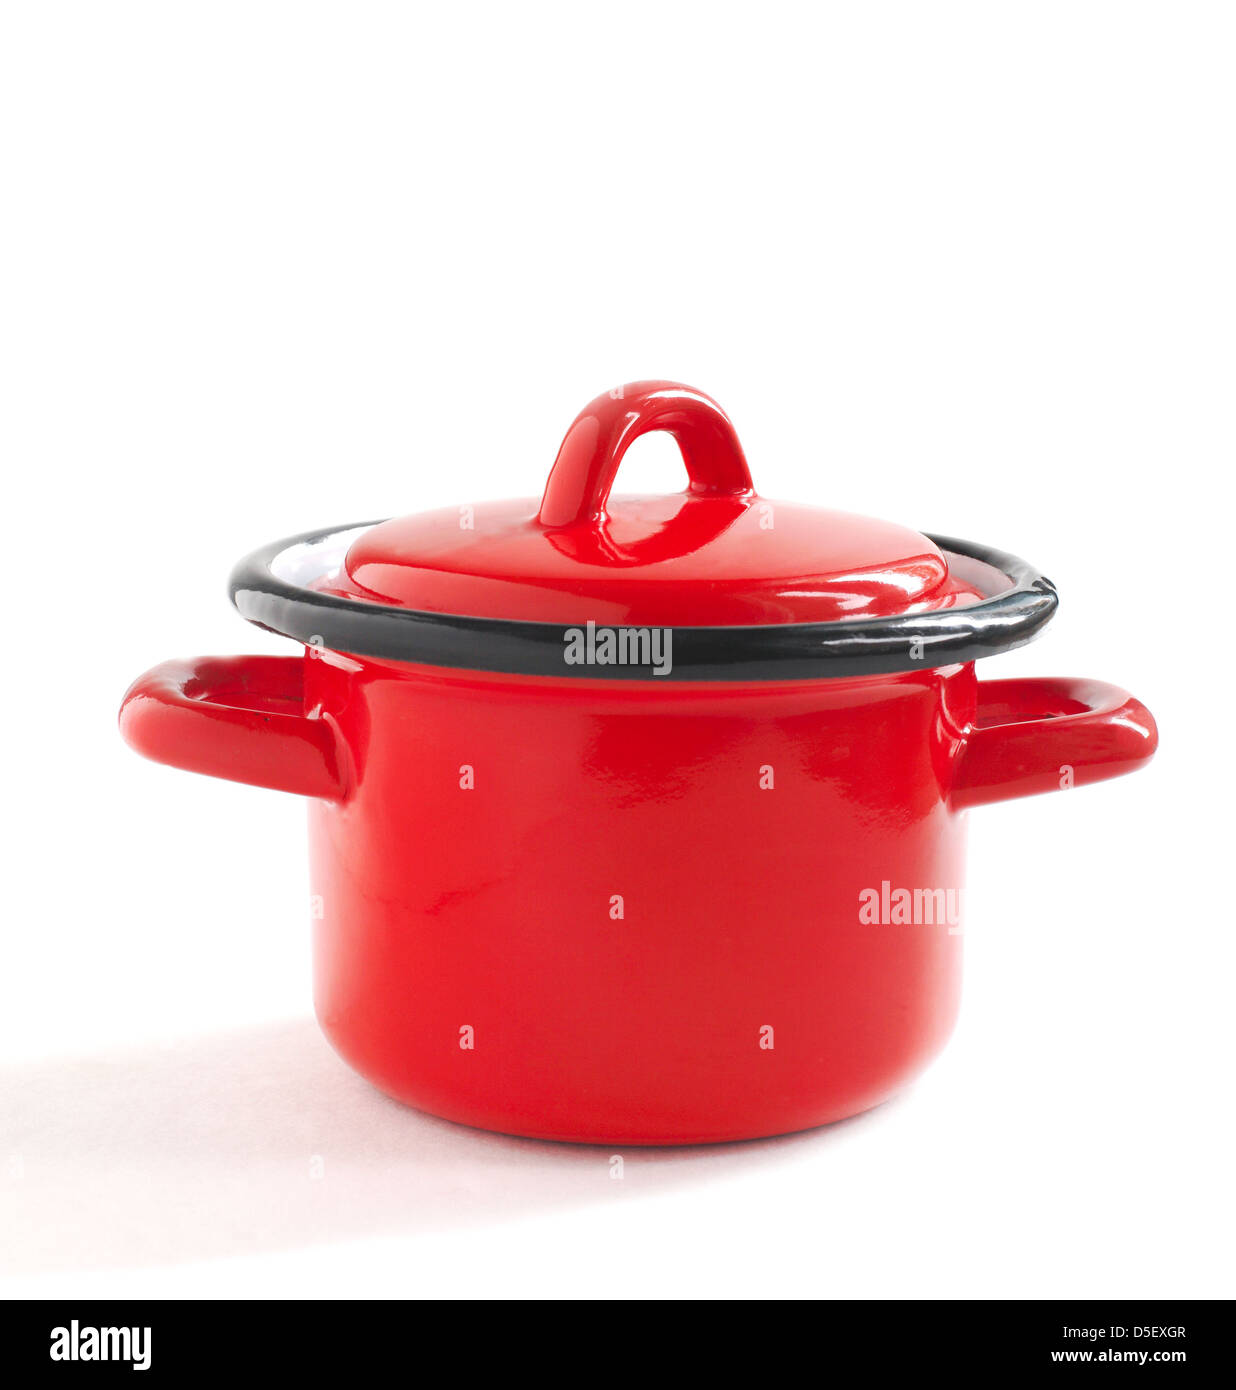 Red cooking pot, isolated on white Stock Photo